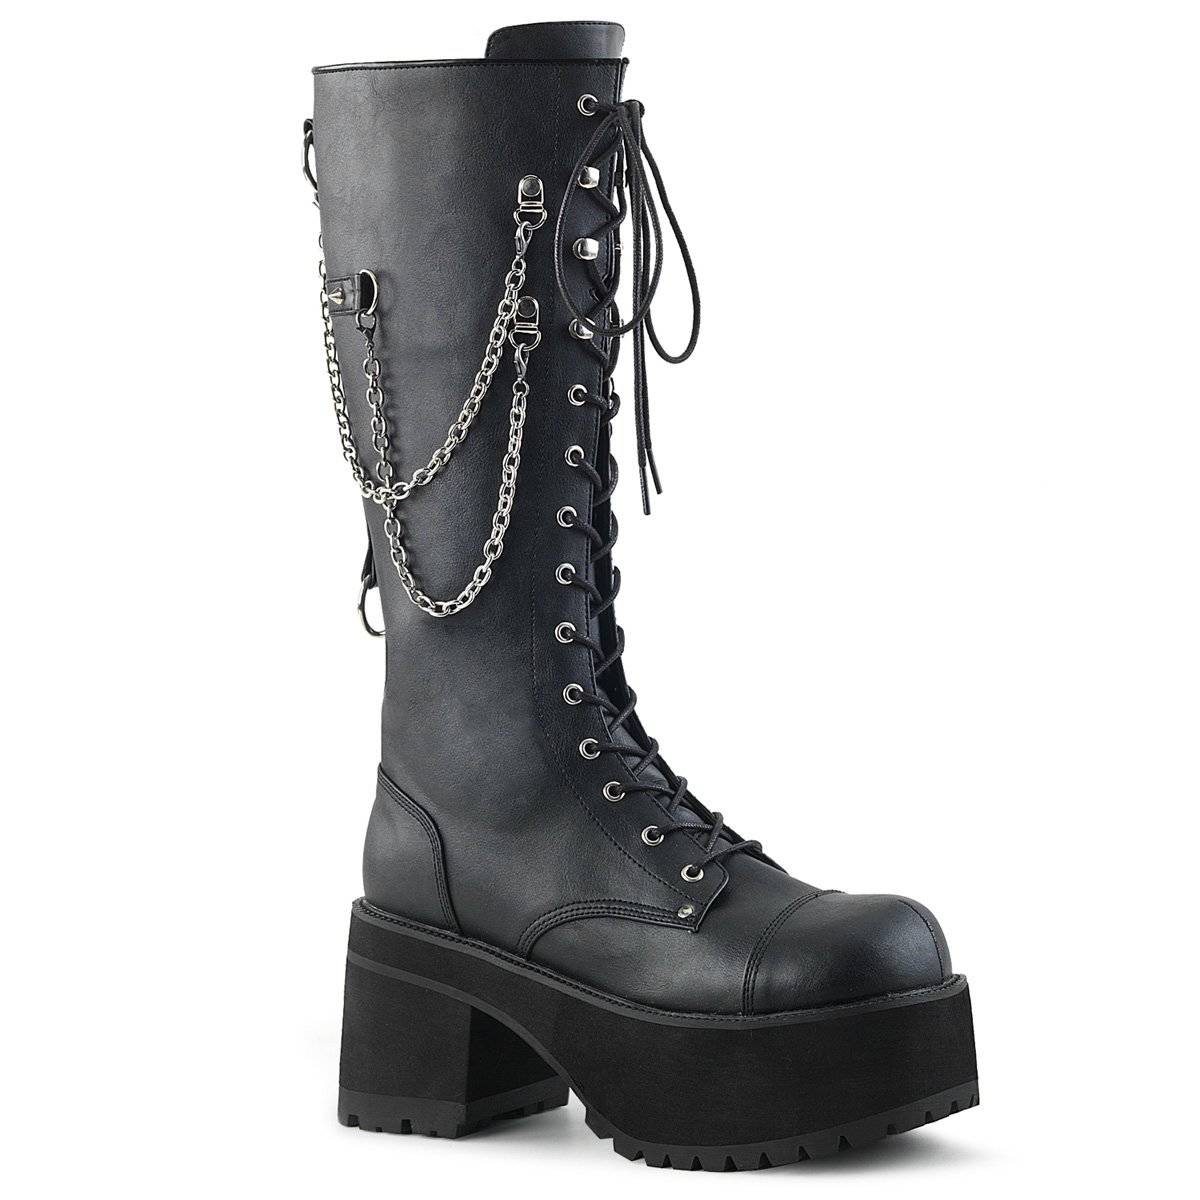 Demonia Ranger-303 Black Faux Leather Mens Knee High Boots South Africa Online ZA54790